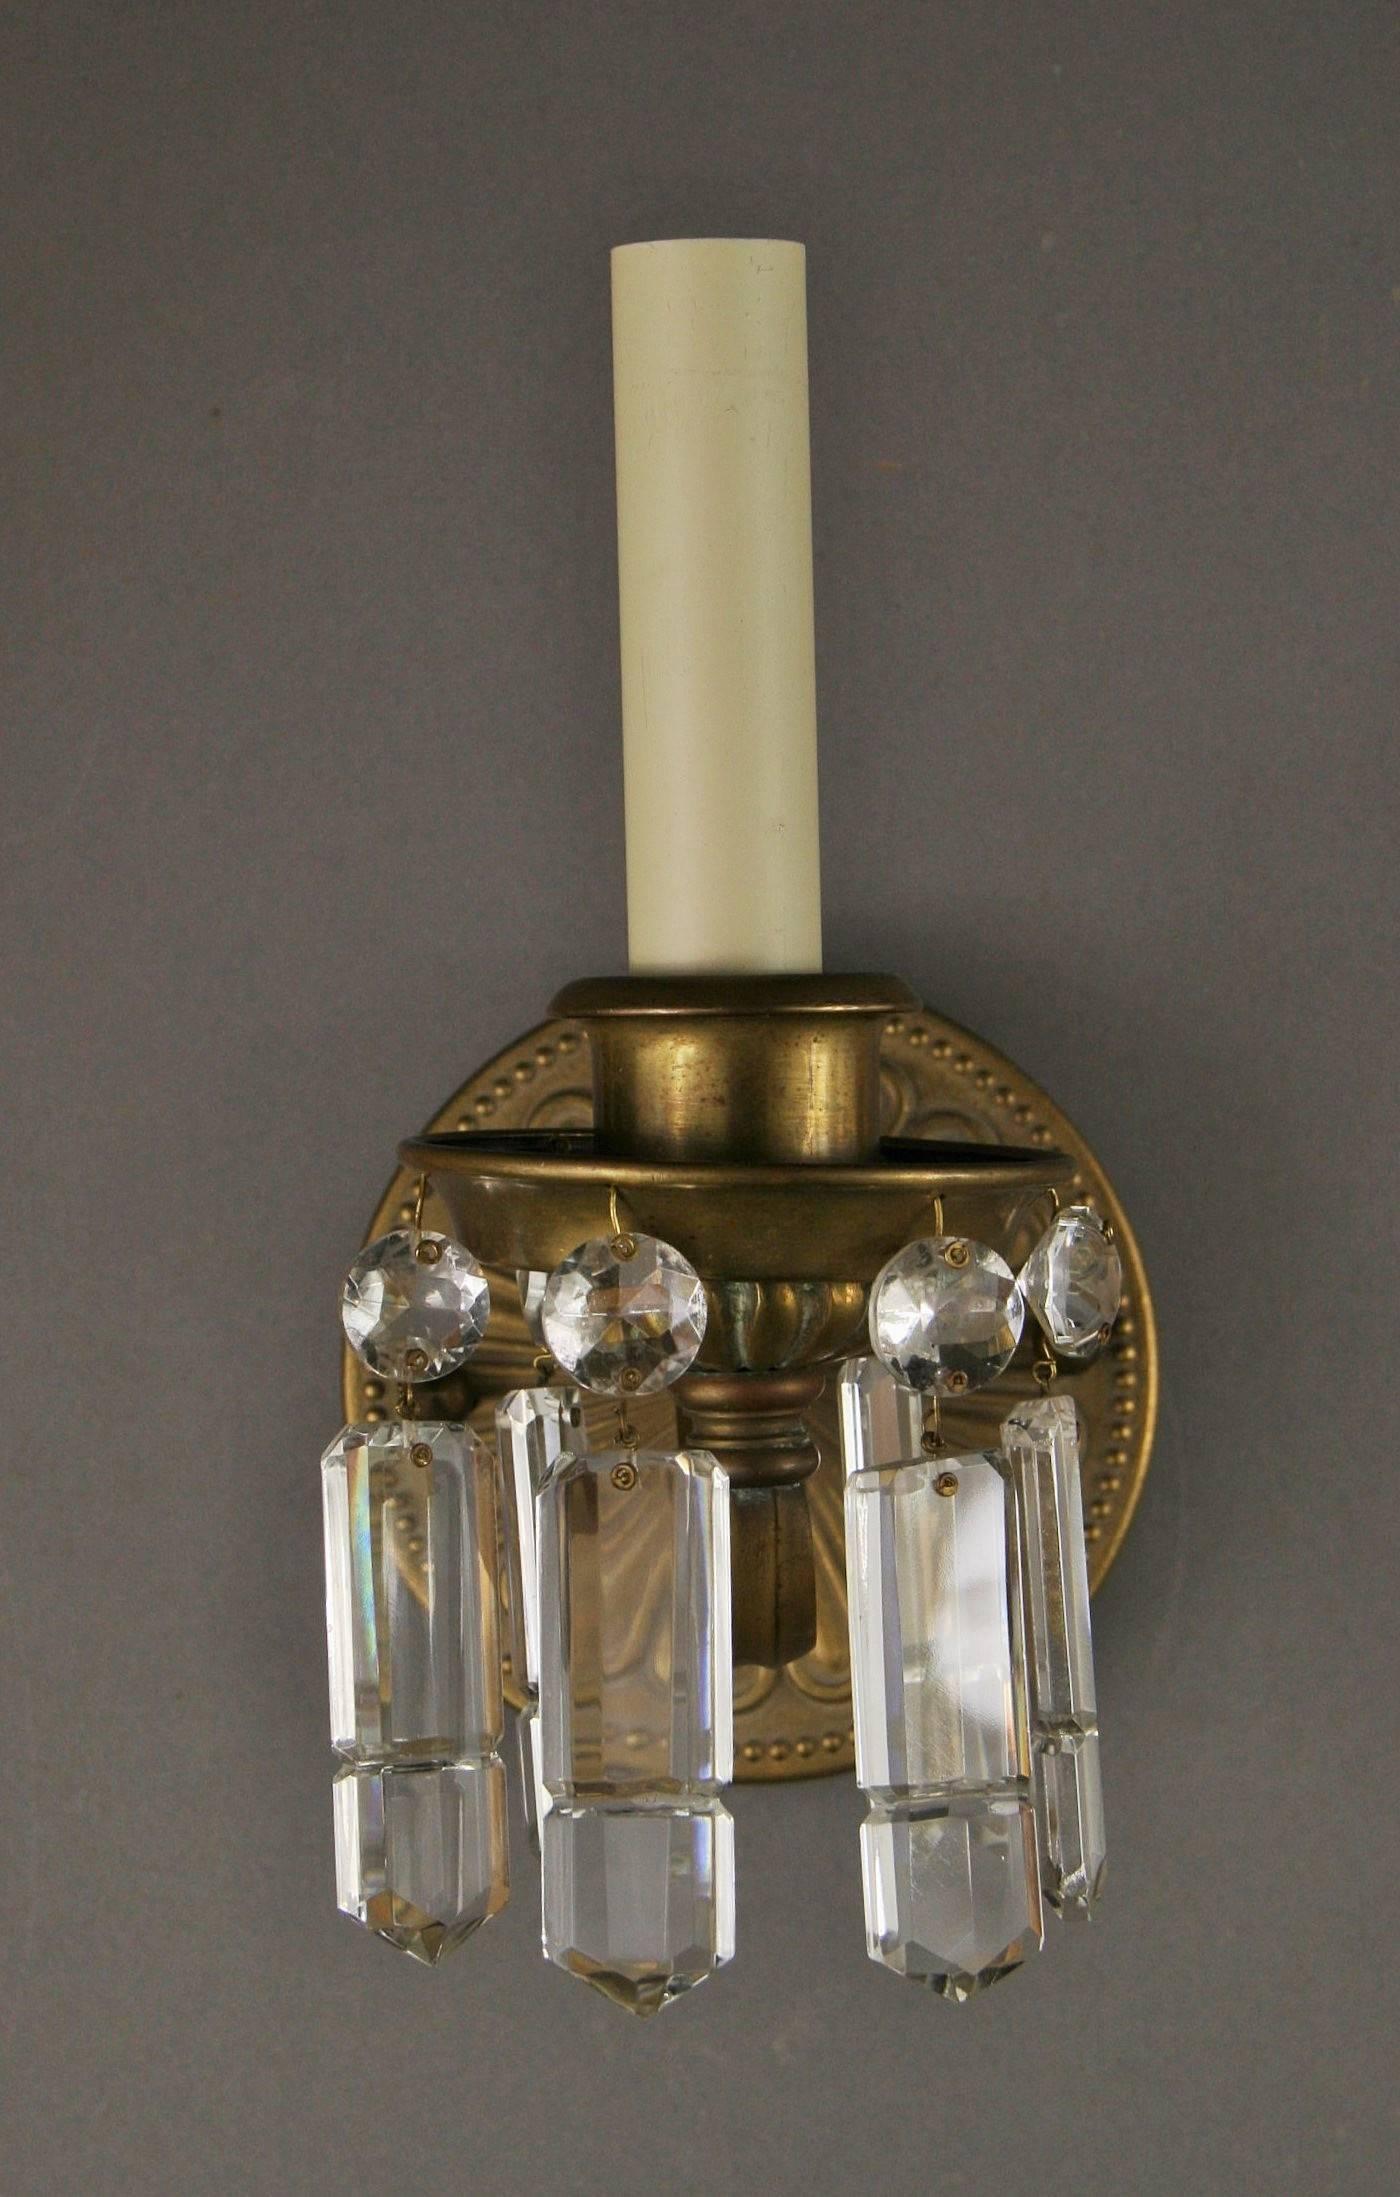 1-4056a pair of brass and crystal one arm sconces. Takes one 60 watt max candelabra base bulb.
 